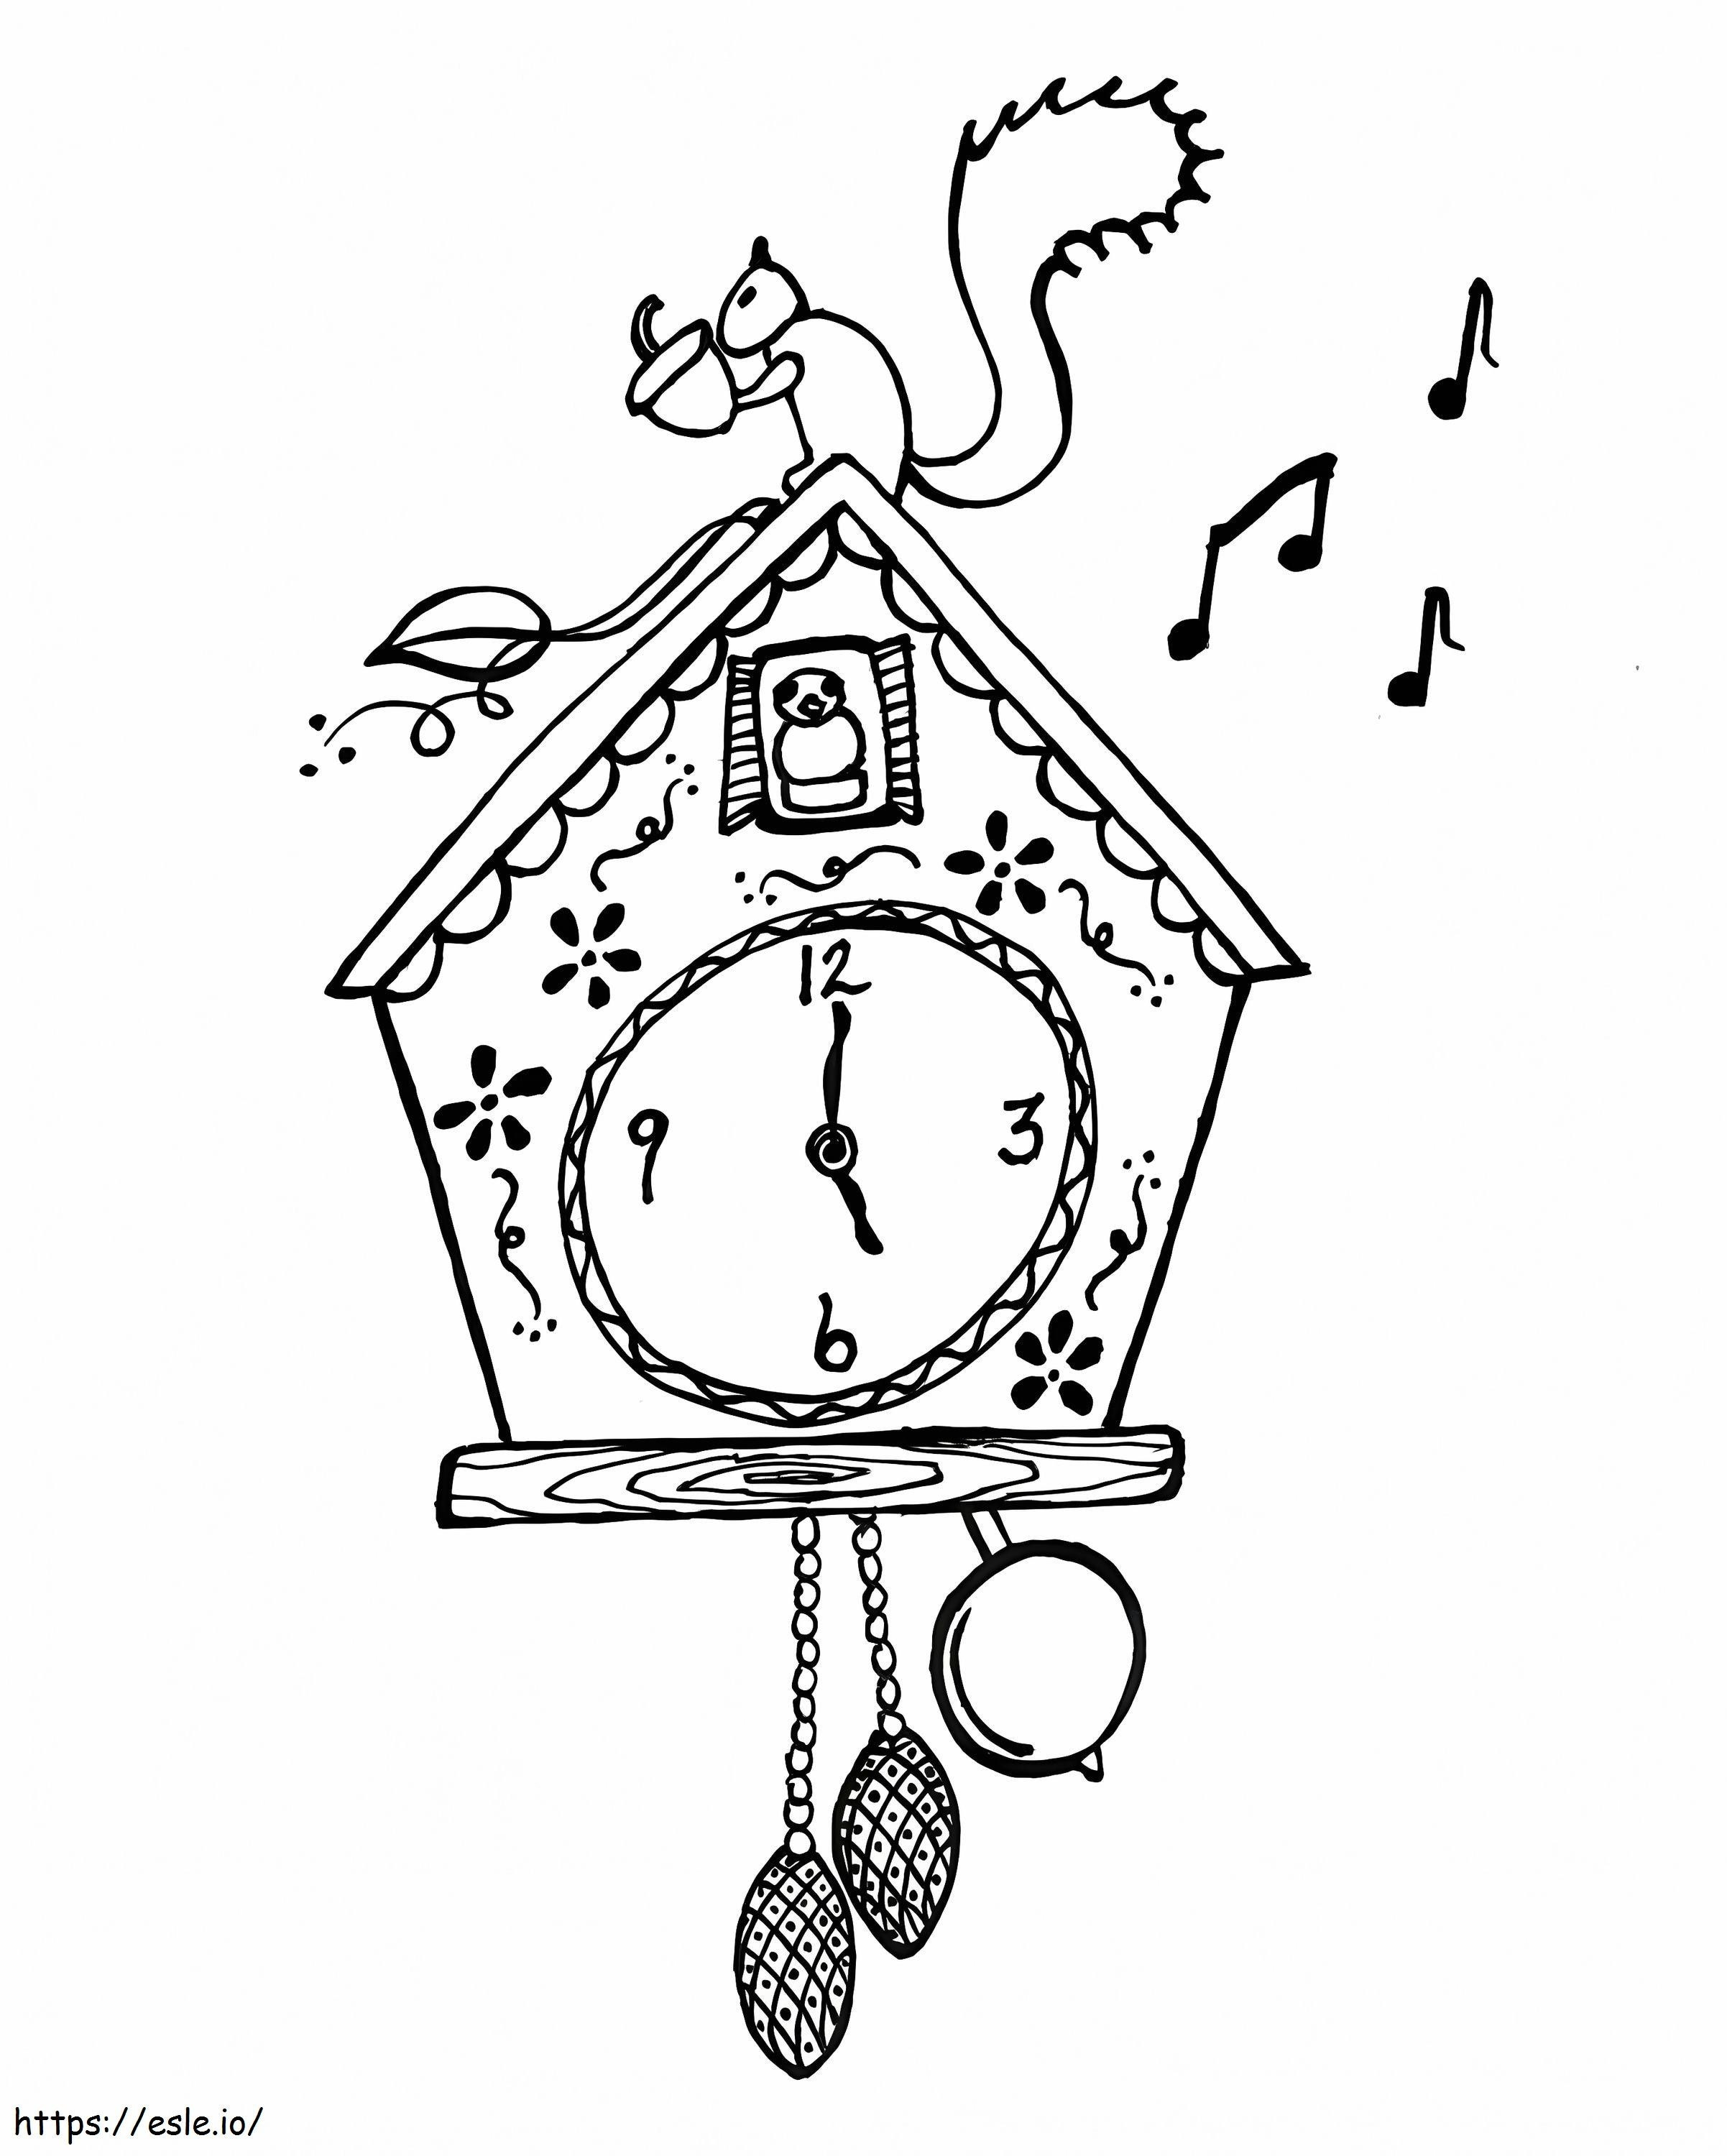 Squirrel On The Clock coloring page